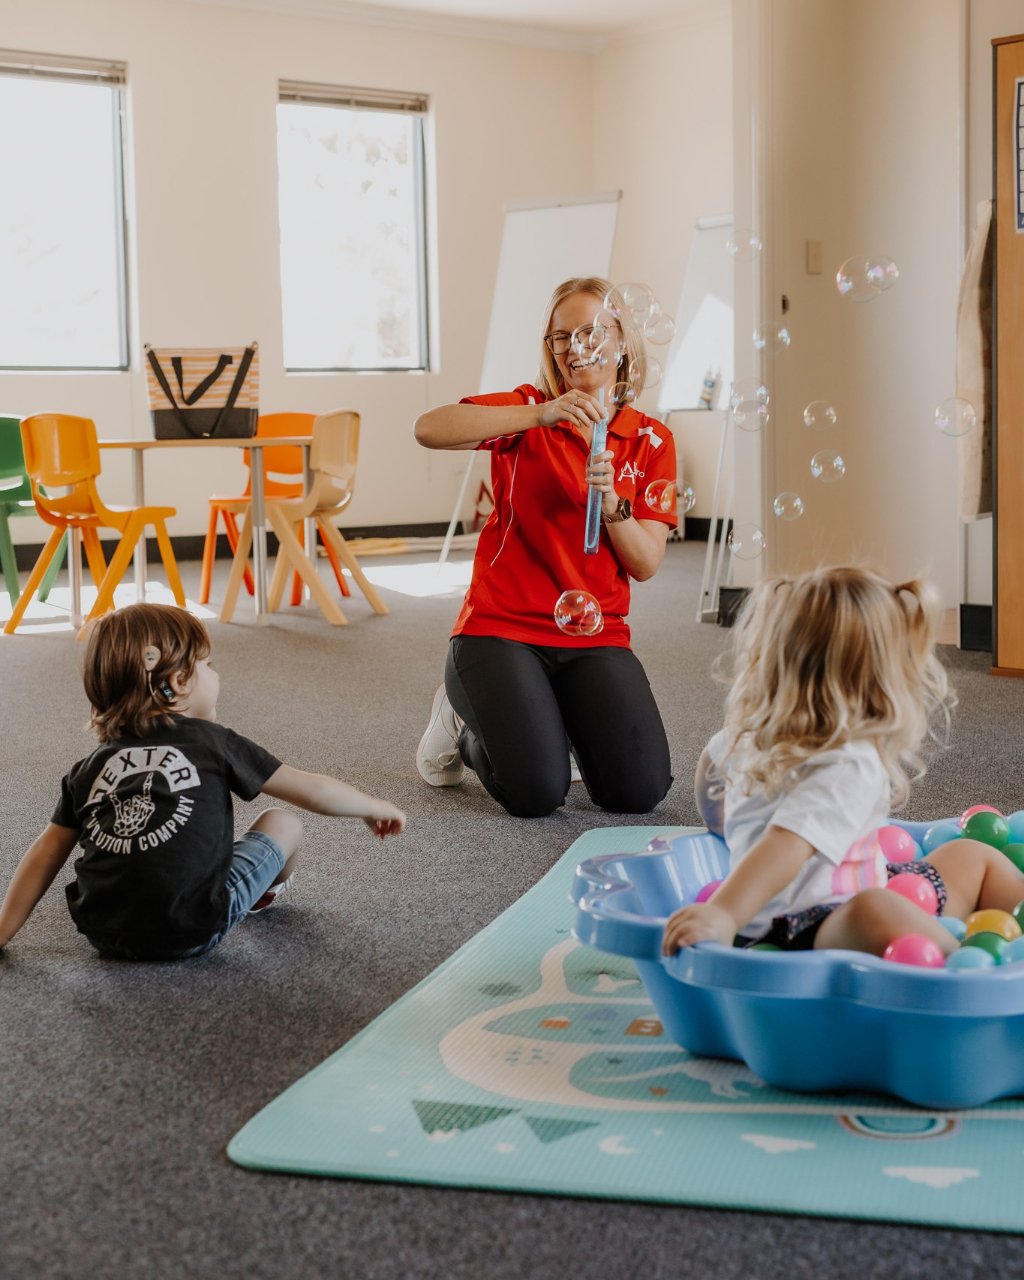 Struggling with speech or communication? Allegro Therapy's Speech Pathologists are here to help! 🤩 Our customised Speechie programs aim to improve verbal and written communication skills, so you can express yourself clearly.

Learn more on our blog!